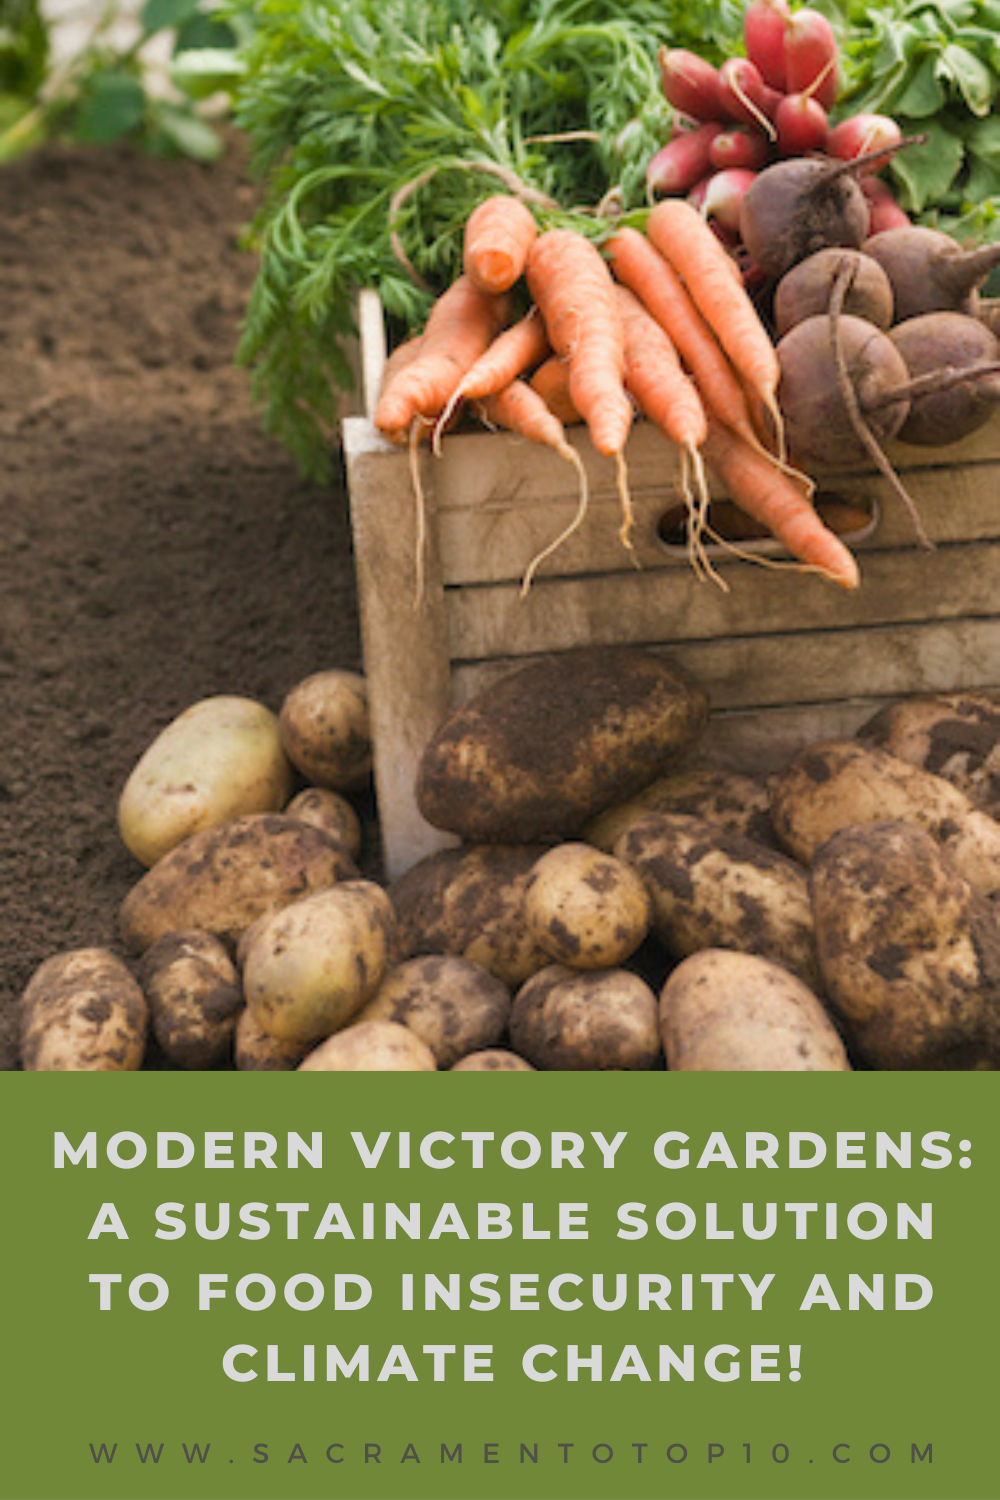 Modern Victory Gardens: A Sustainable Solution to Food Insecurity and Climate Change